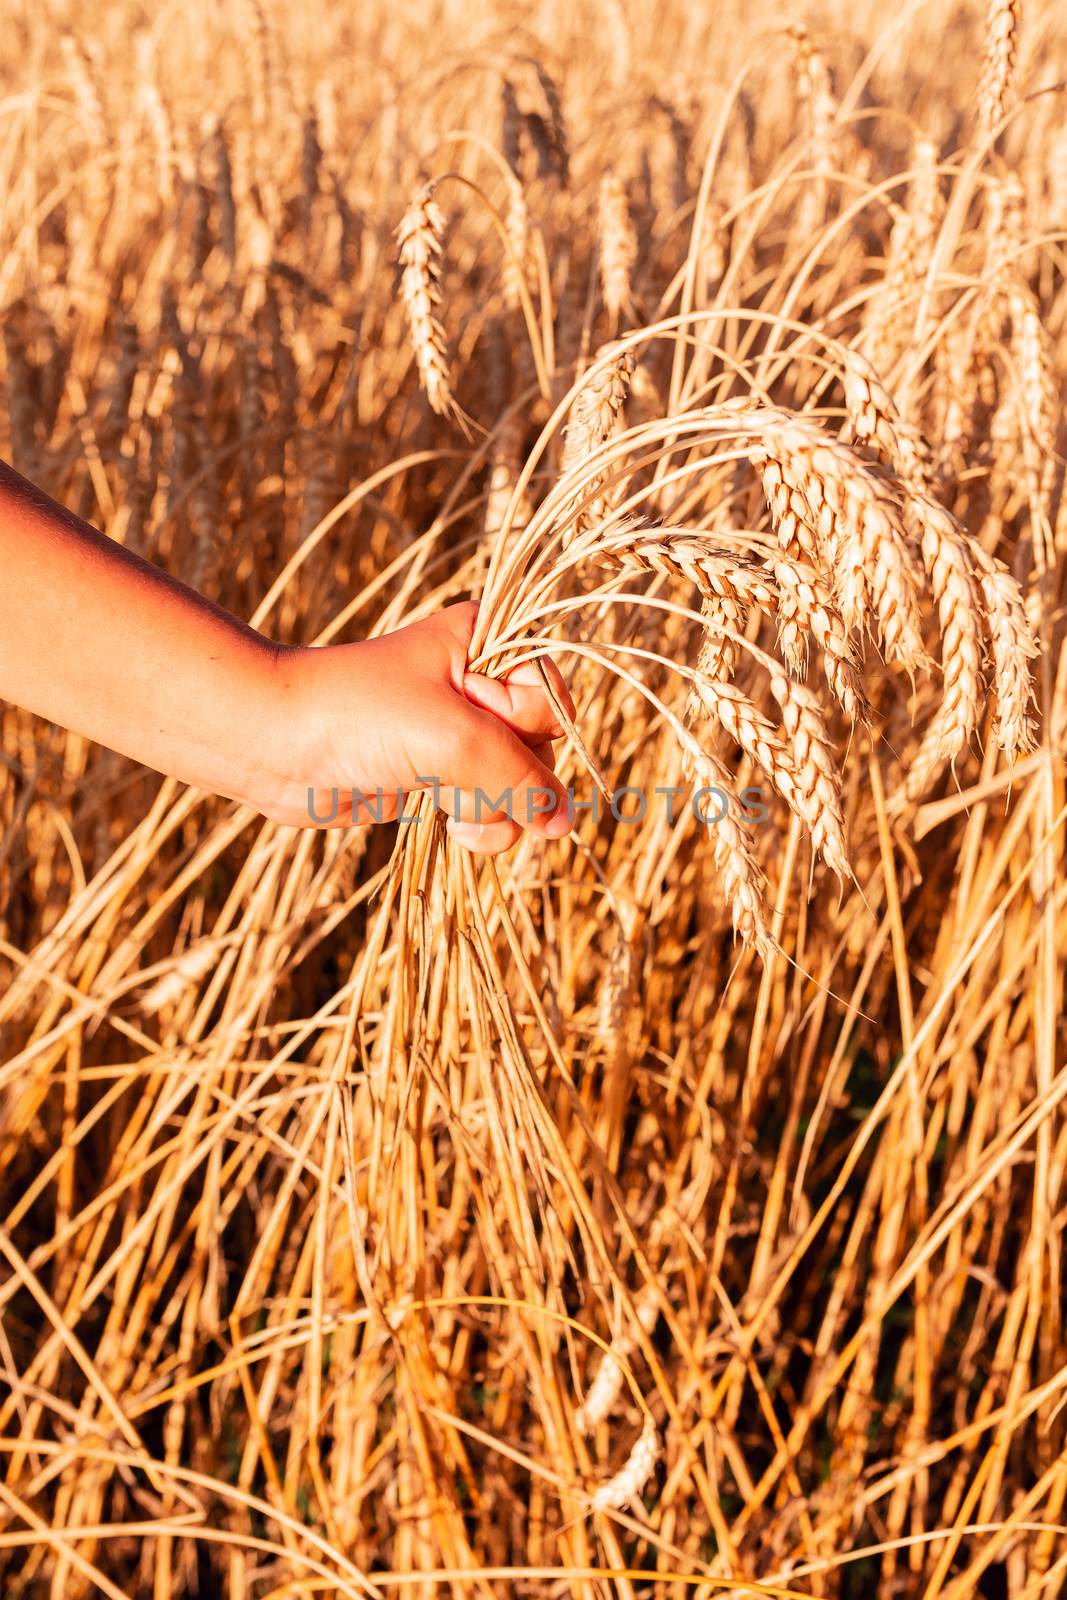 Child's hand holding golden wheat ears against golden wheat field background